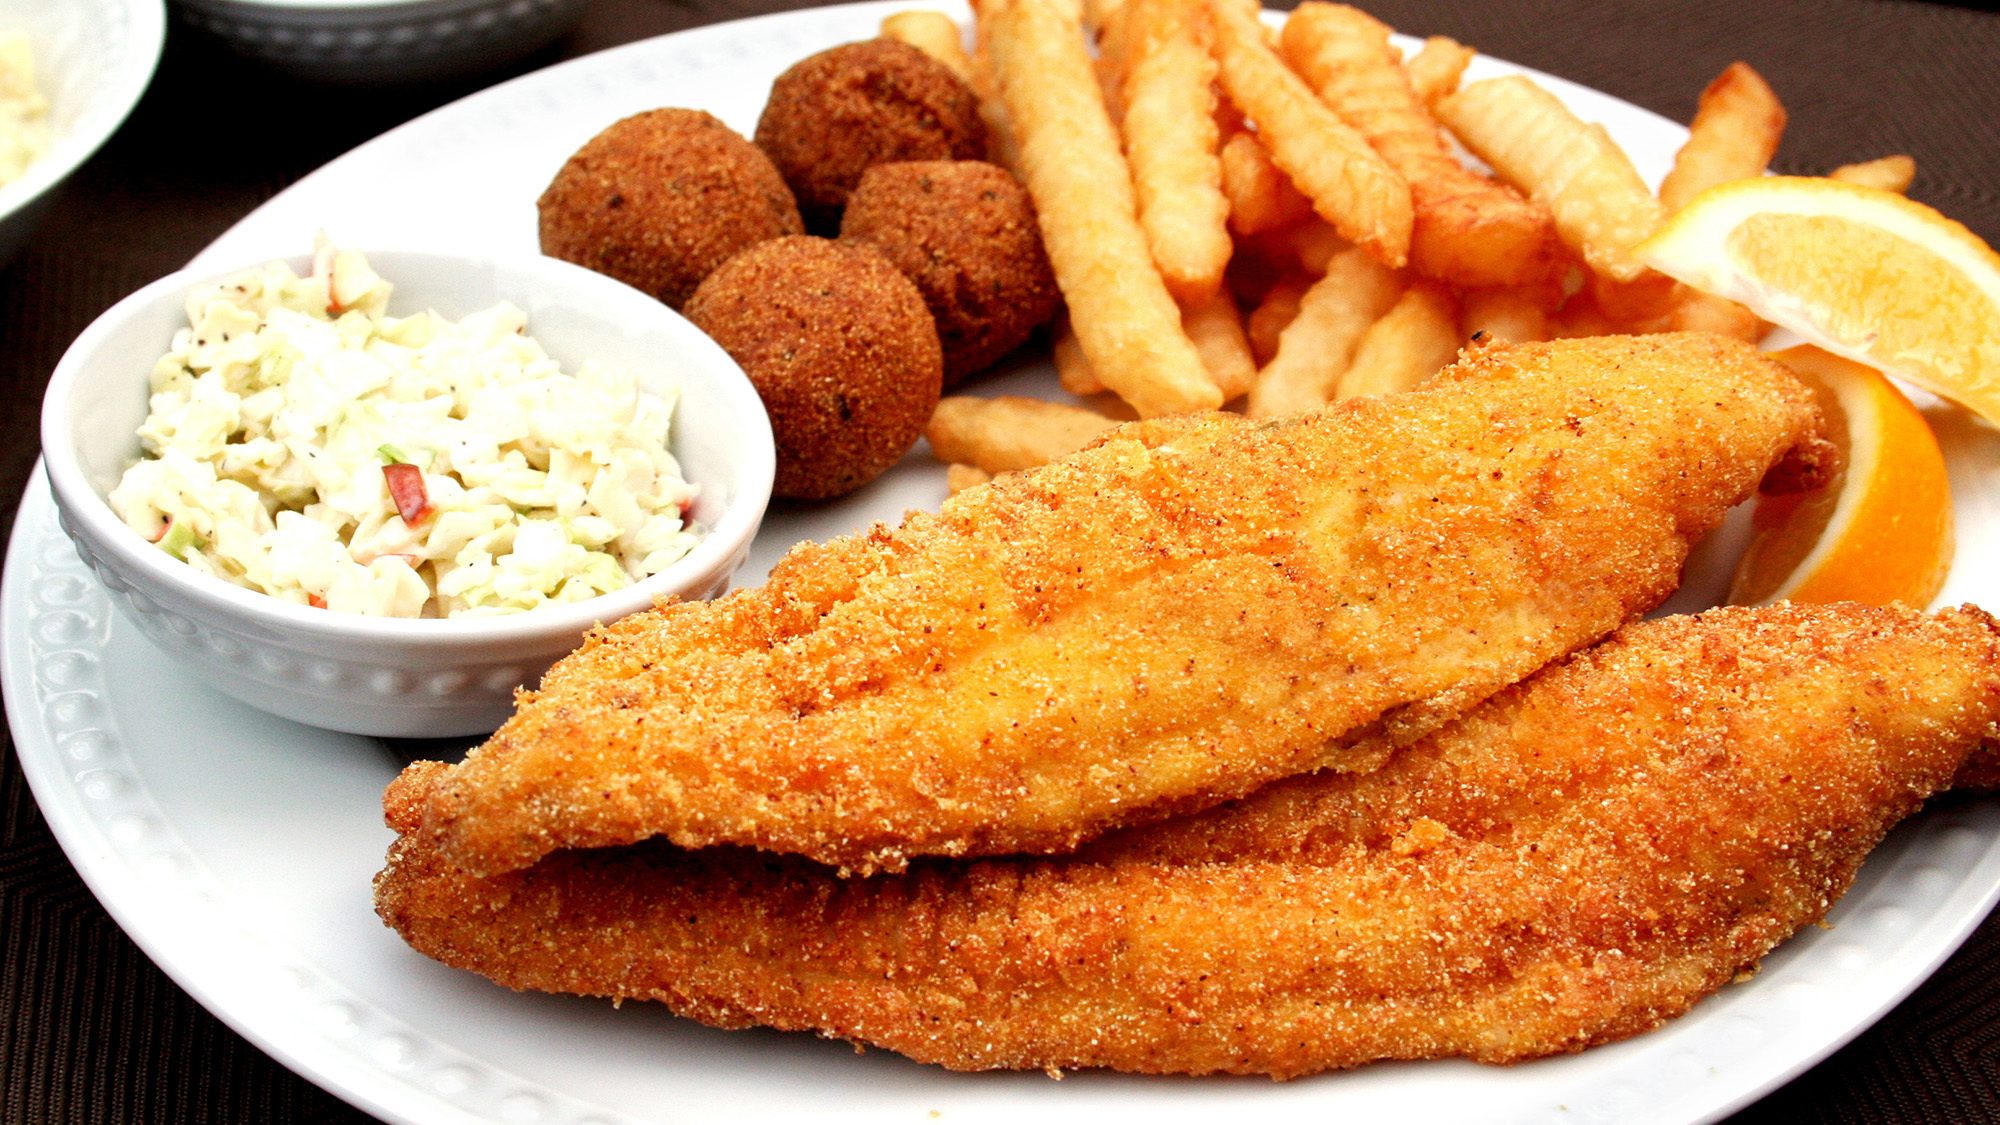 best places for fried fish near me